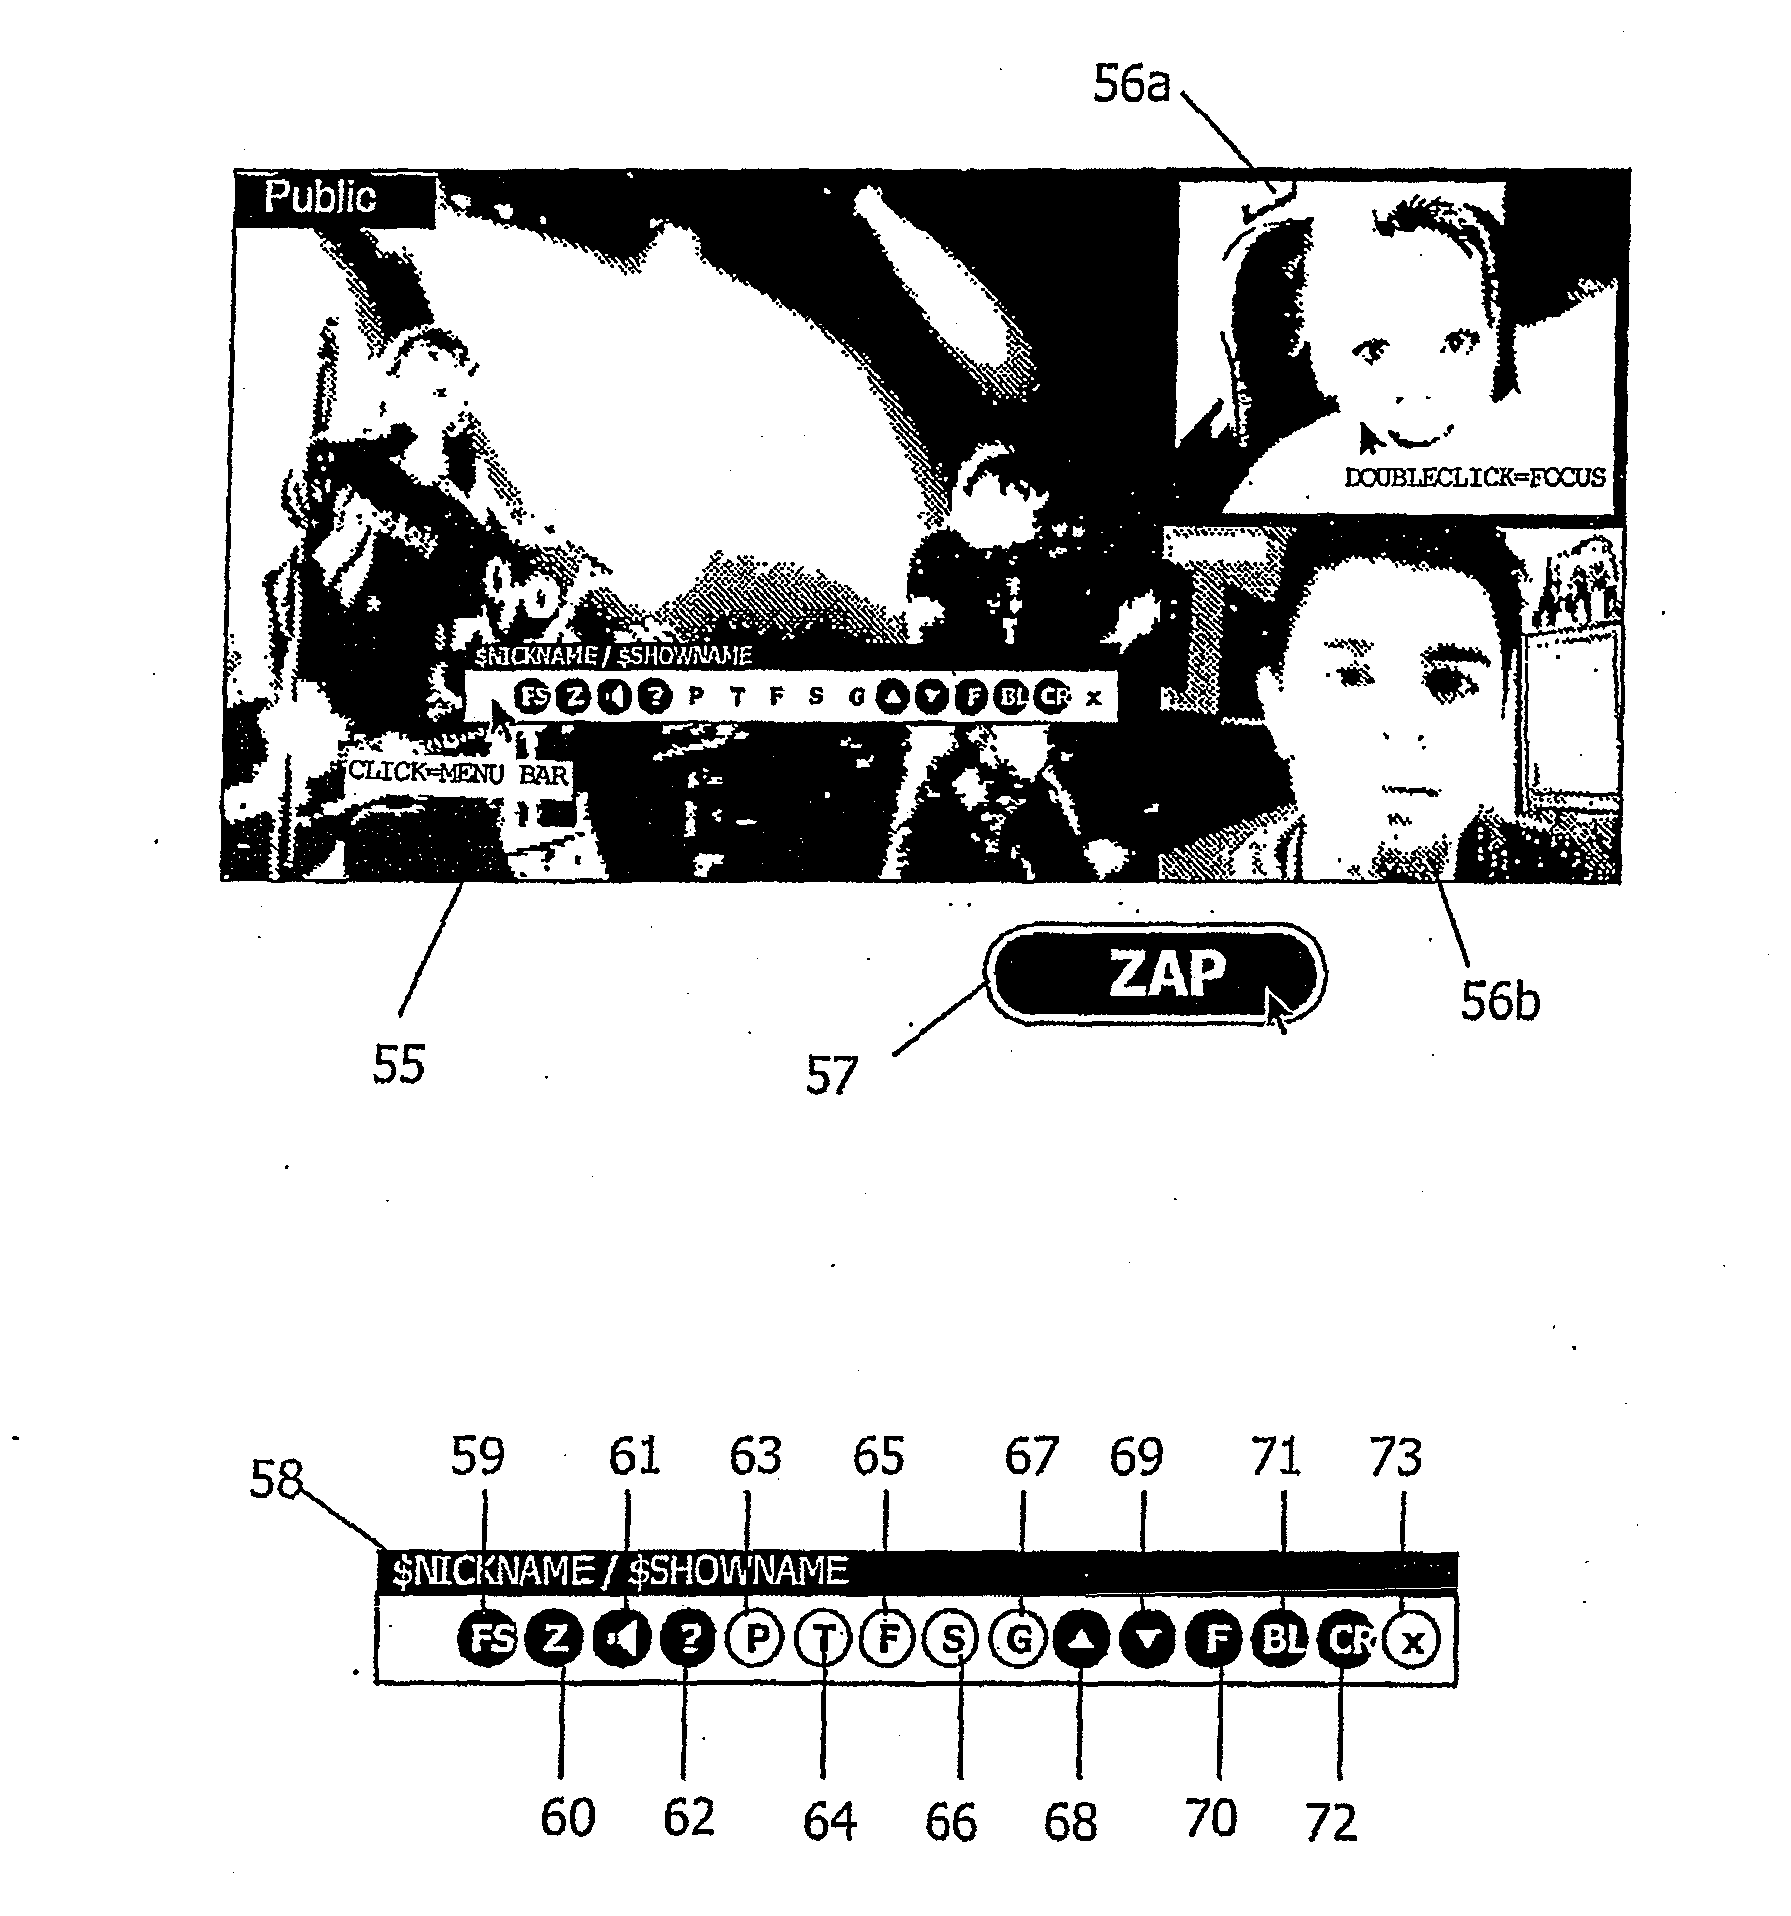 Method for Carrying Out a Multimedia Communication Based on a Network Protocol, Particularly TCP/IP and/or UDP